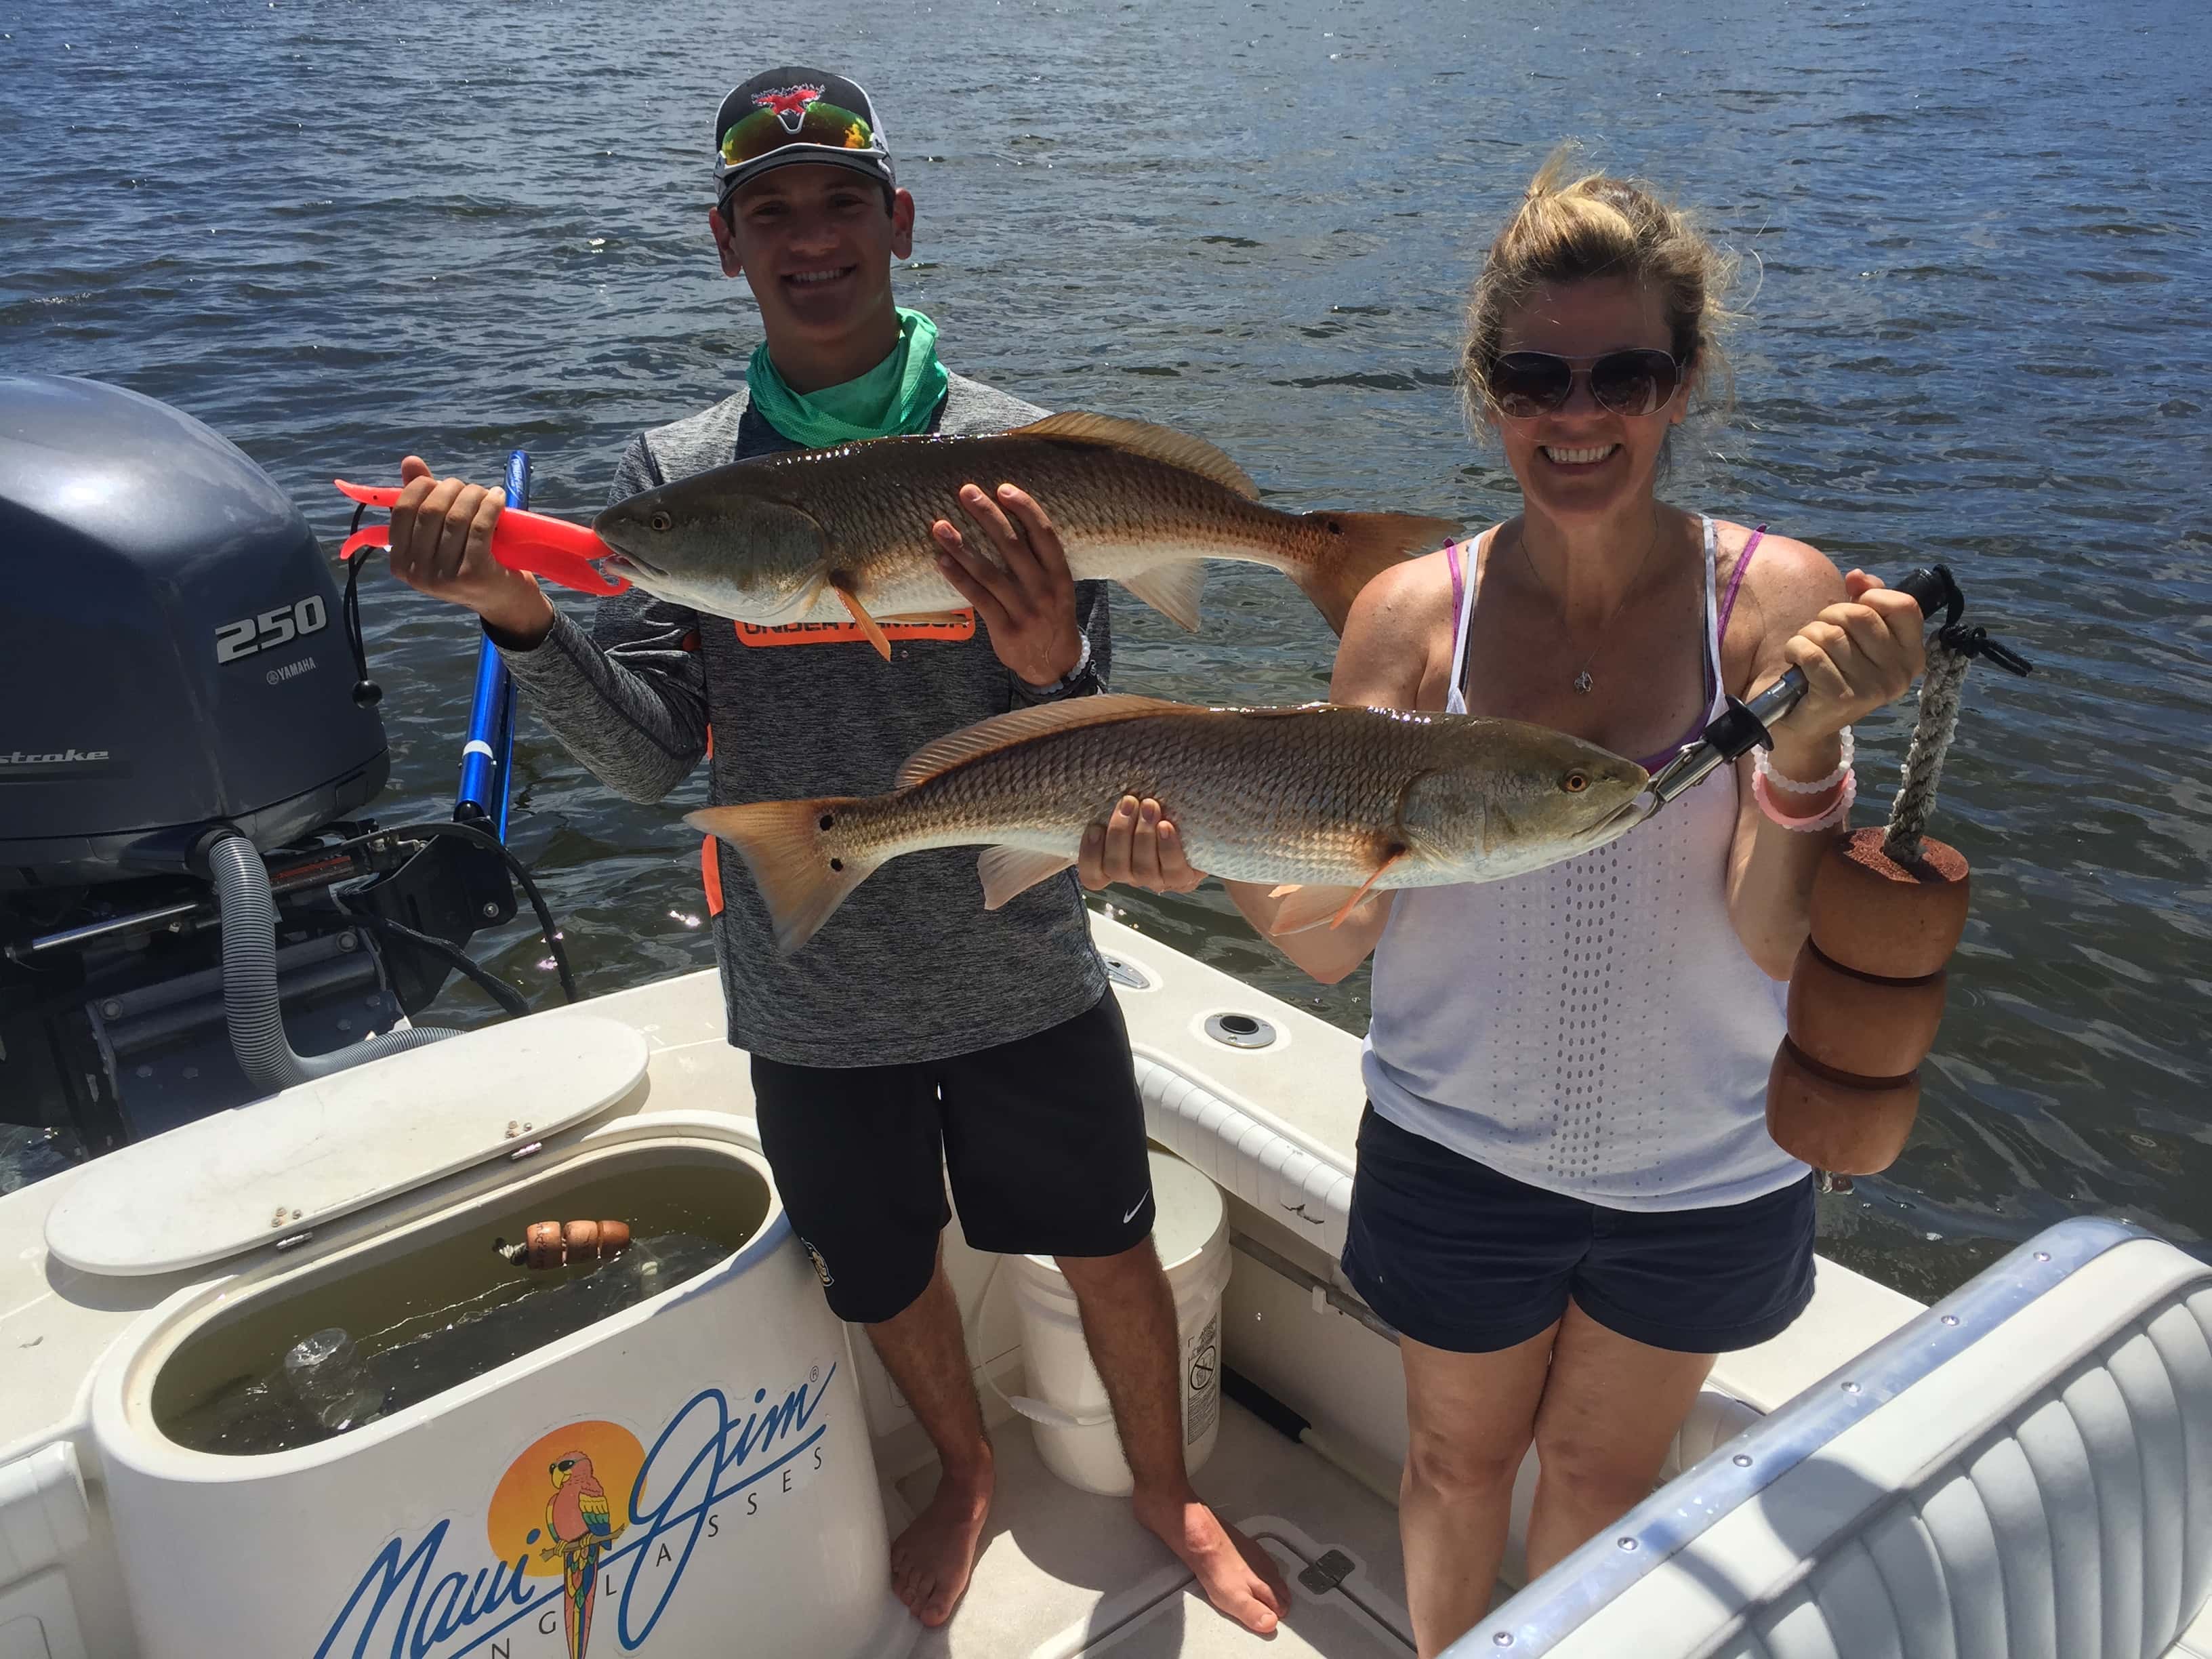 Guys Fishing Trip in Tampa Bay goes well with Shallow Point